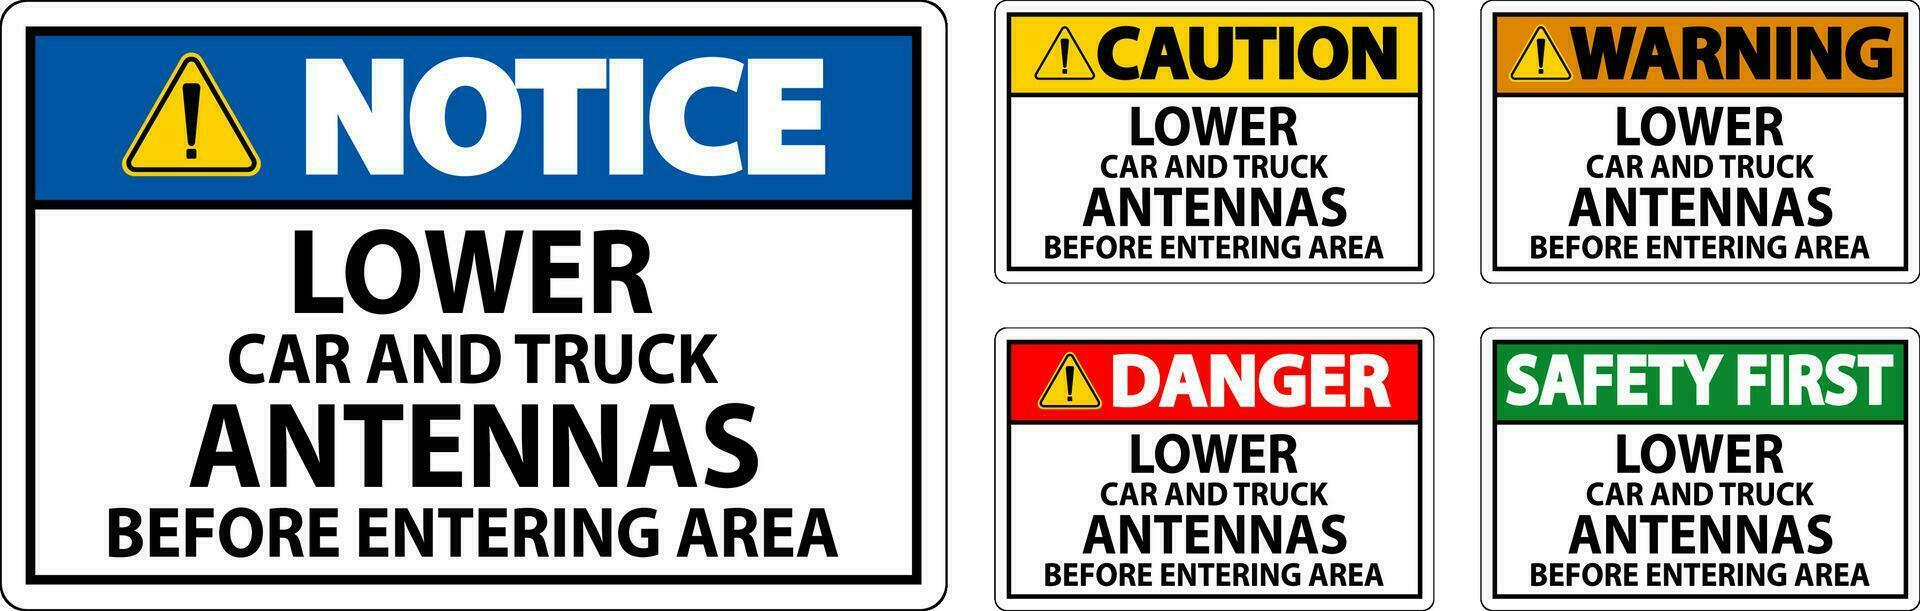 Danger Sign Lower Car And Truck Antennas Before Entering Area vector